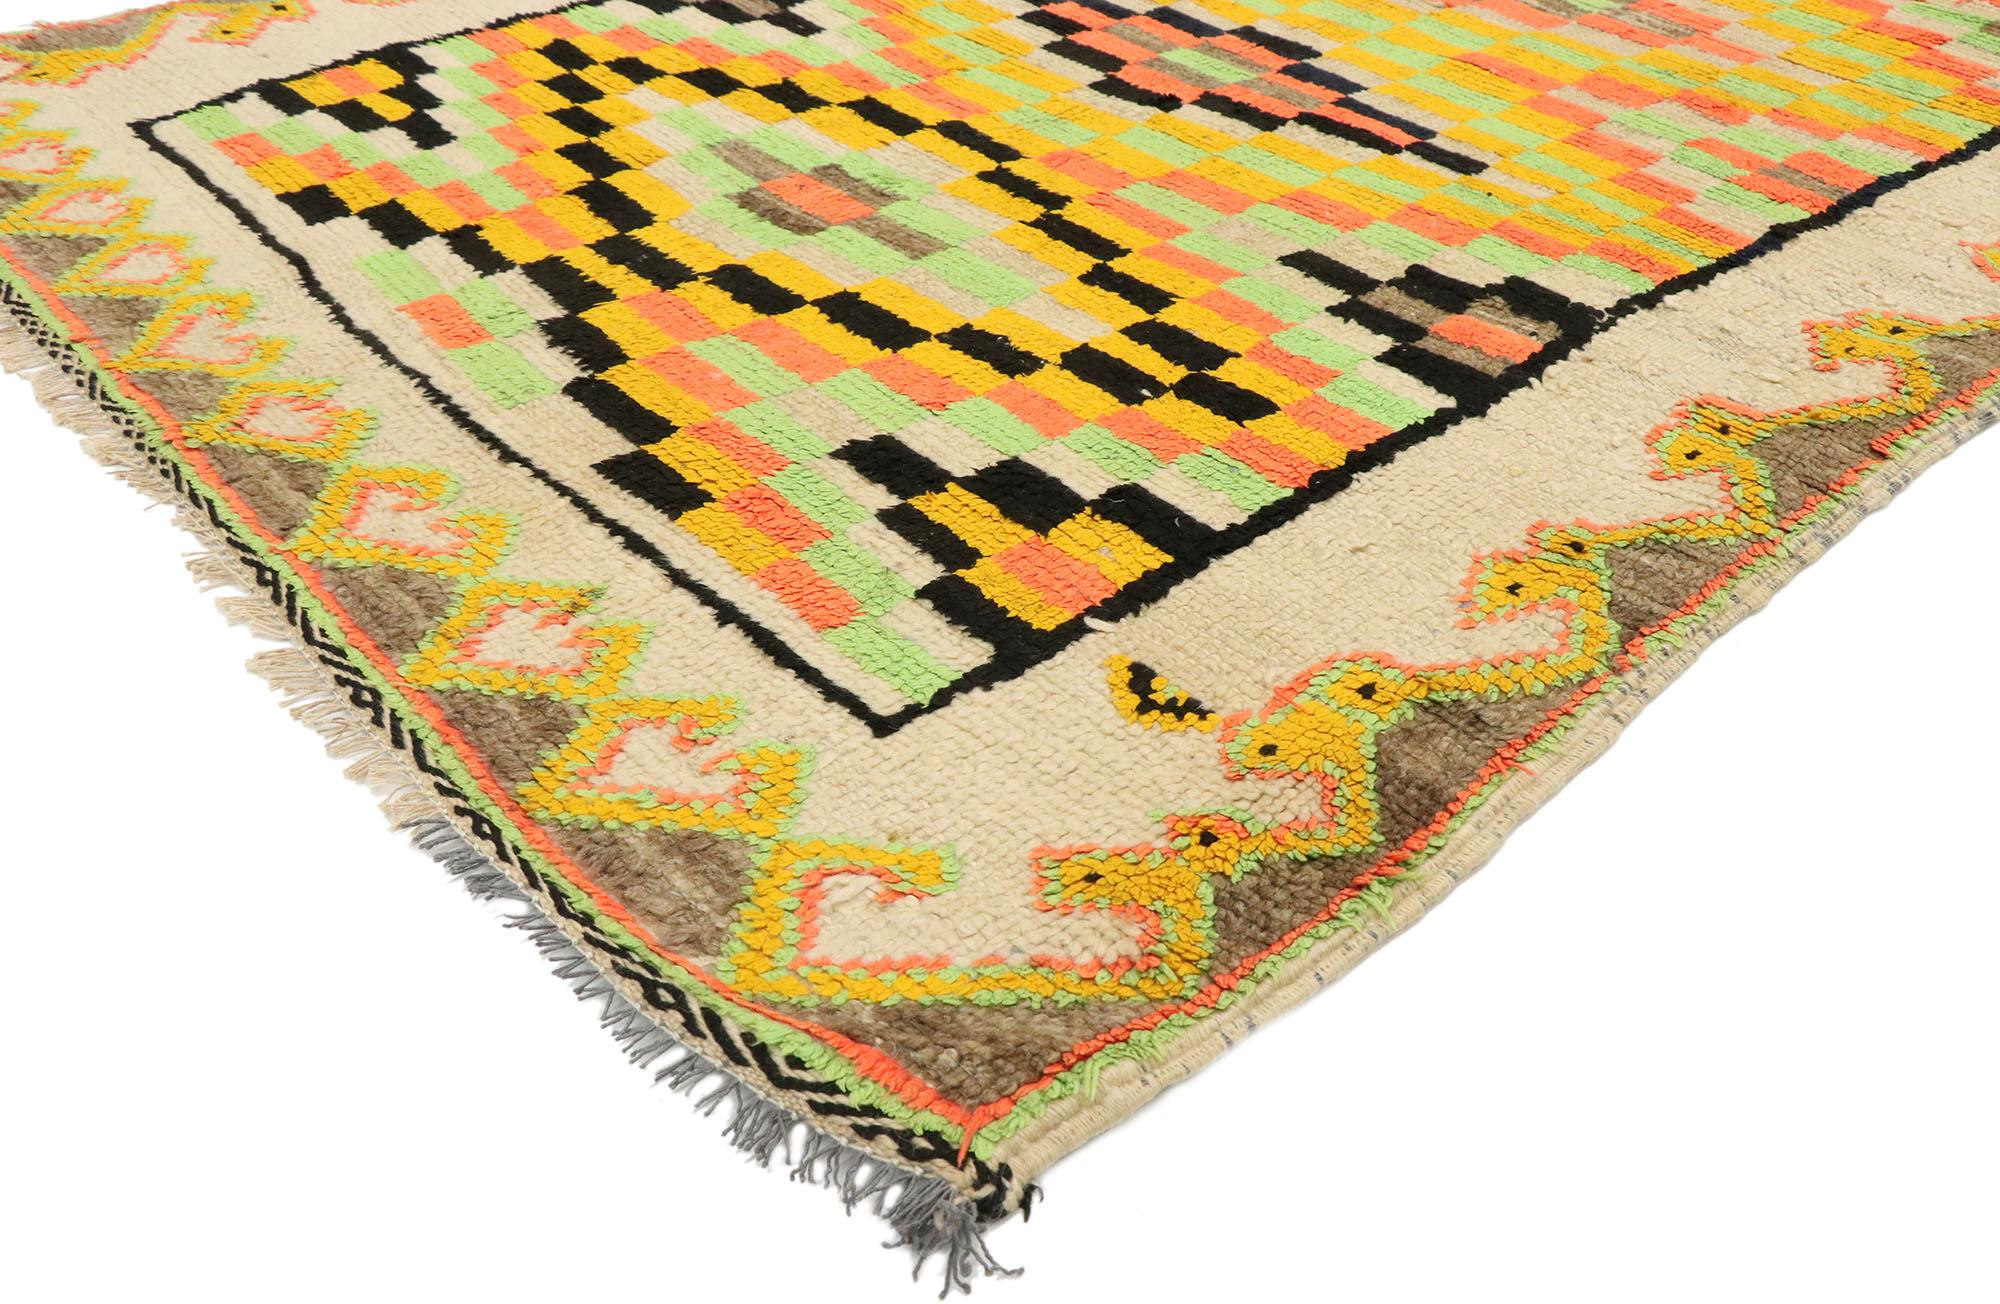 20574 Vintage Boujad Moroccan Rug, 04'01 X 07'02. Dive into the vibrant world of Boujad rugs, emerging from the lively streets of Boujad in the Khouribga region. Meticulously crafted by skilled Berber tribes, notably the Haouz and Rehamna, these